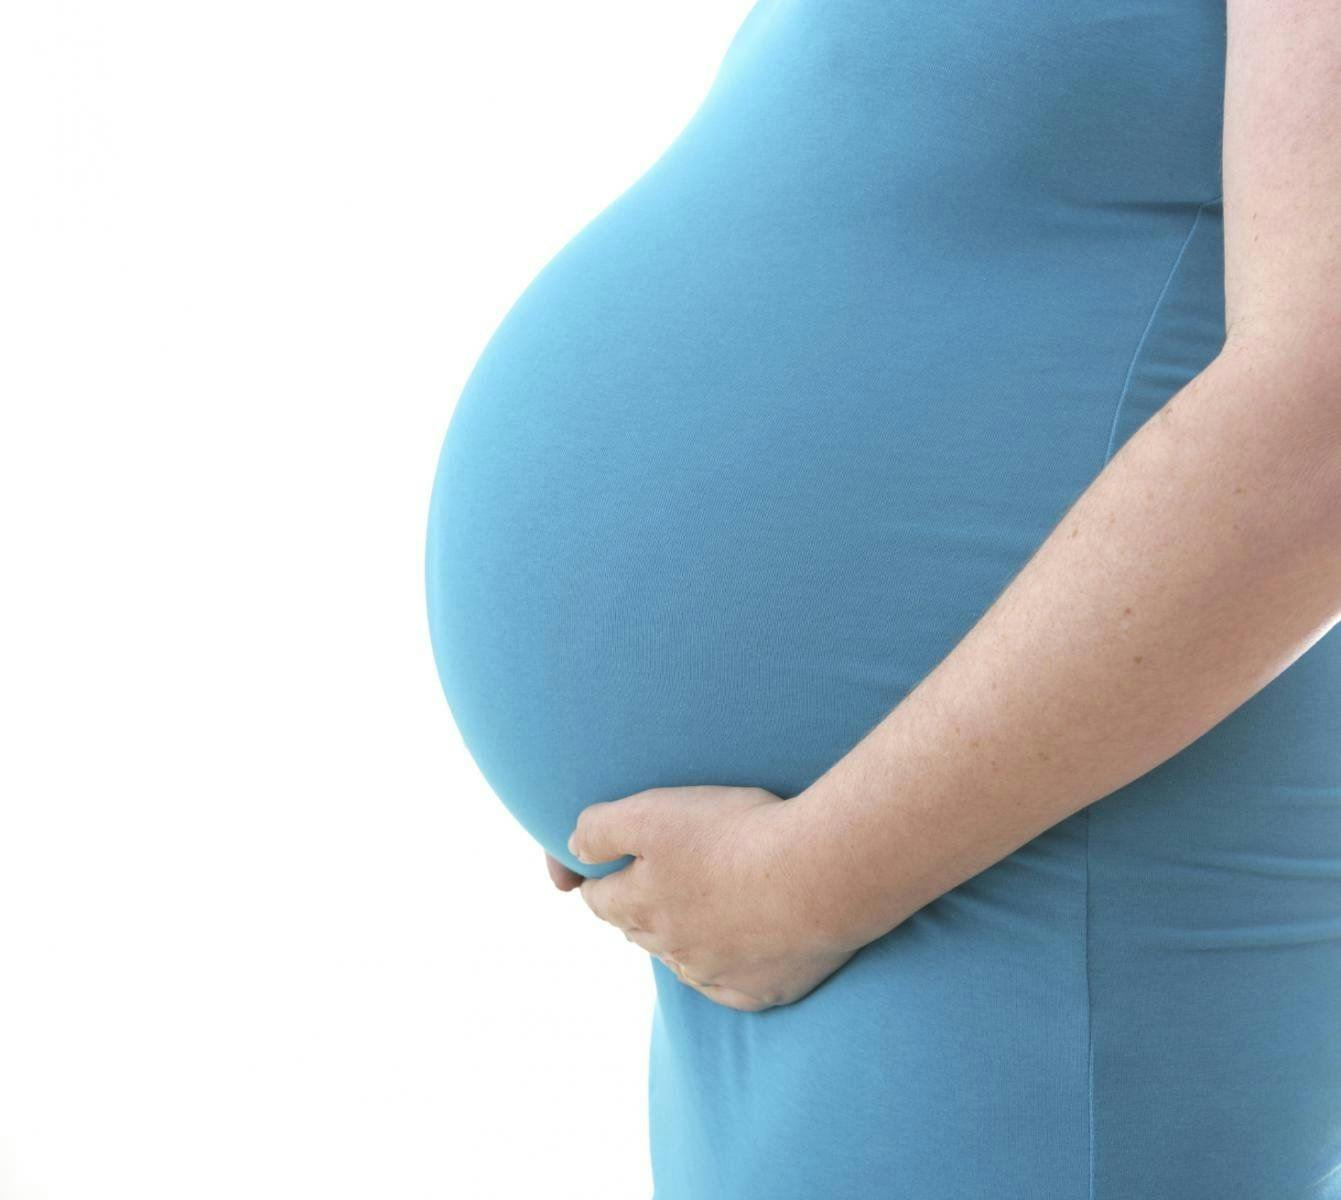 Experts Mull Vitamin D Levels for Pregnancy